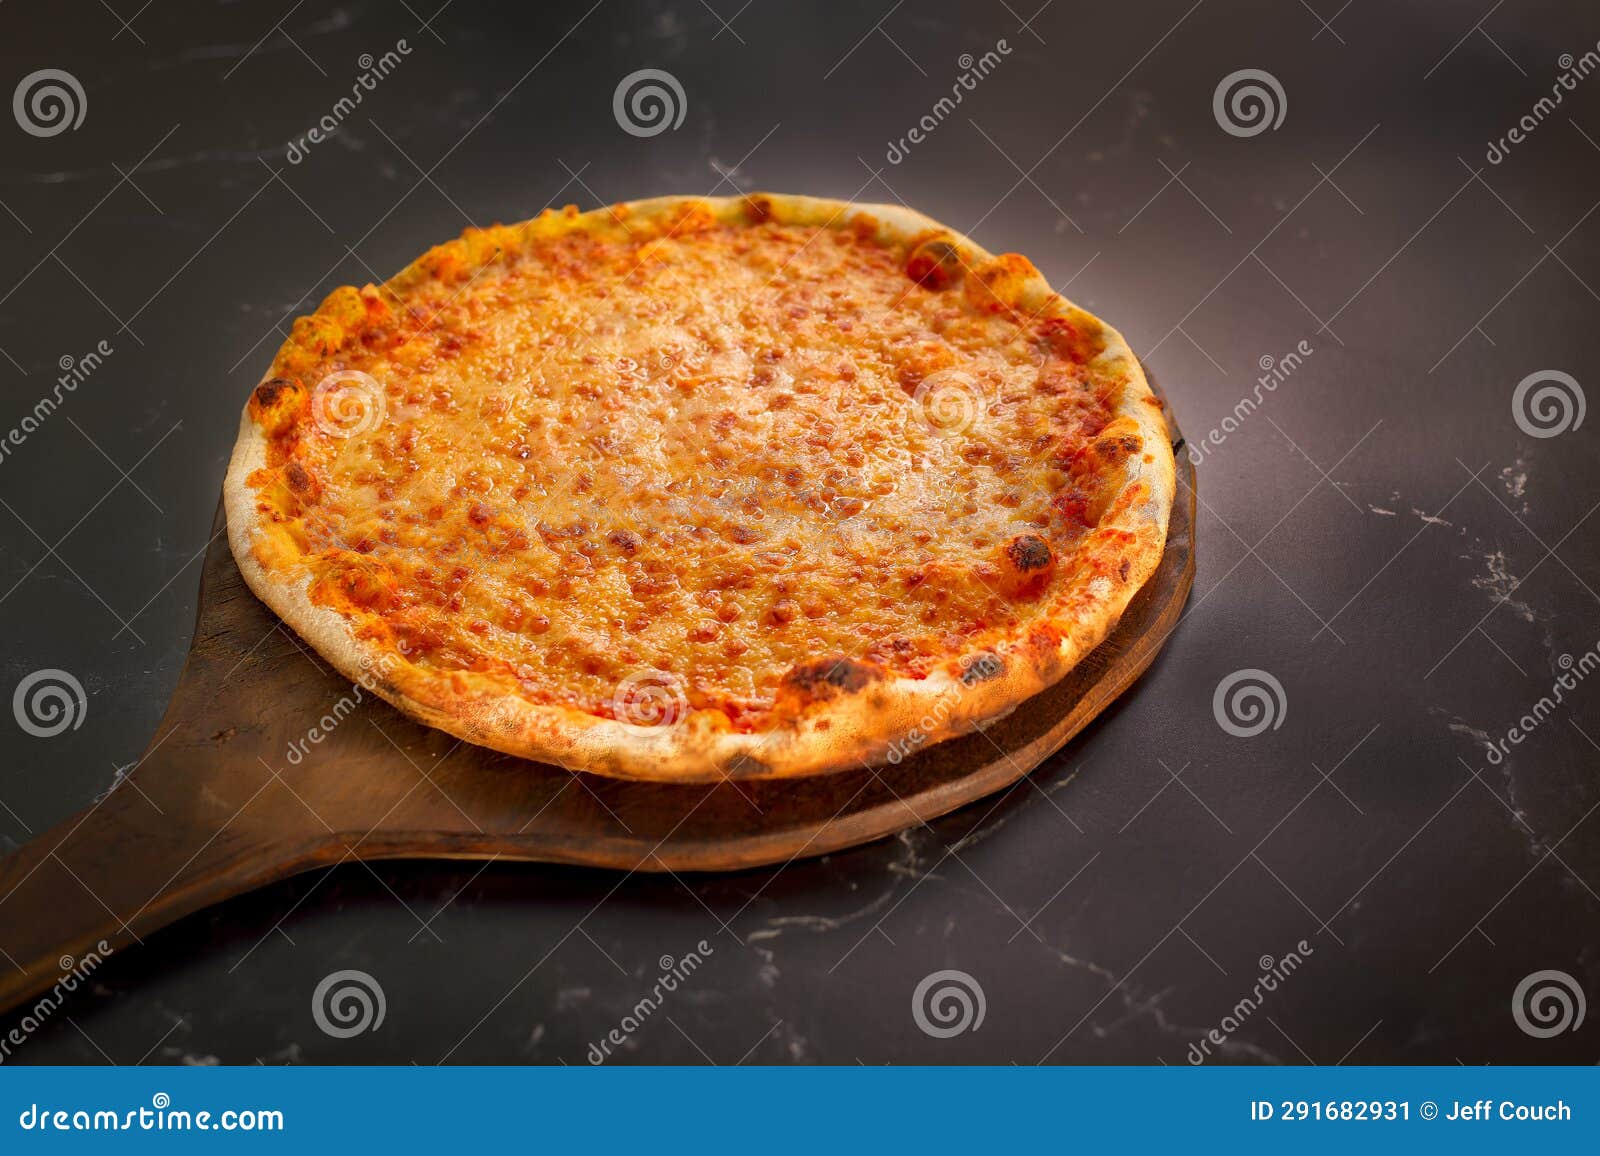 Wood Fired Cheese Pizza on Black Background Stock Image - Image of